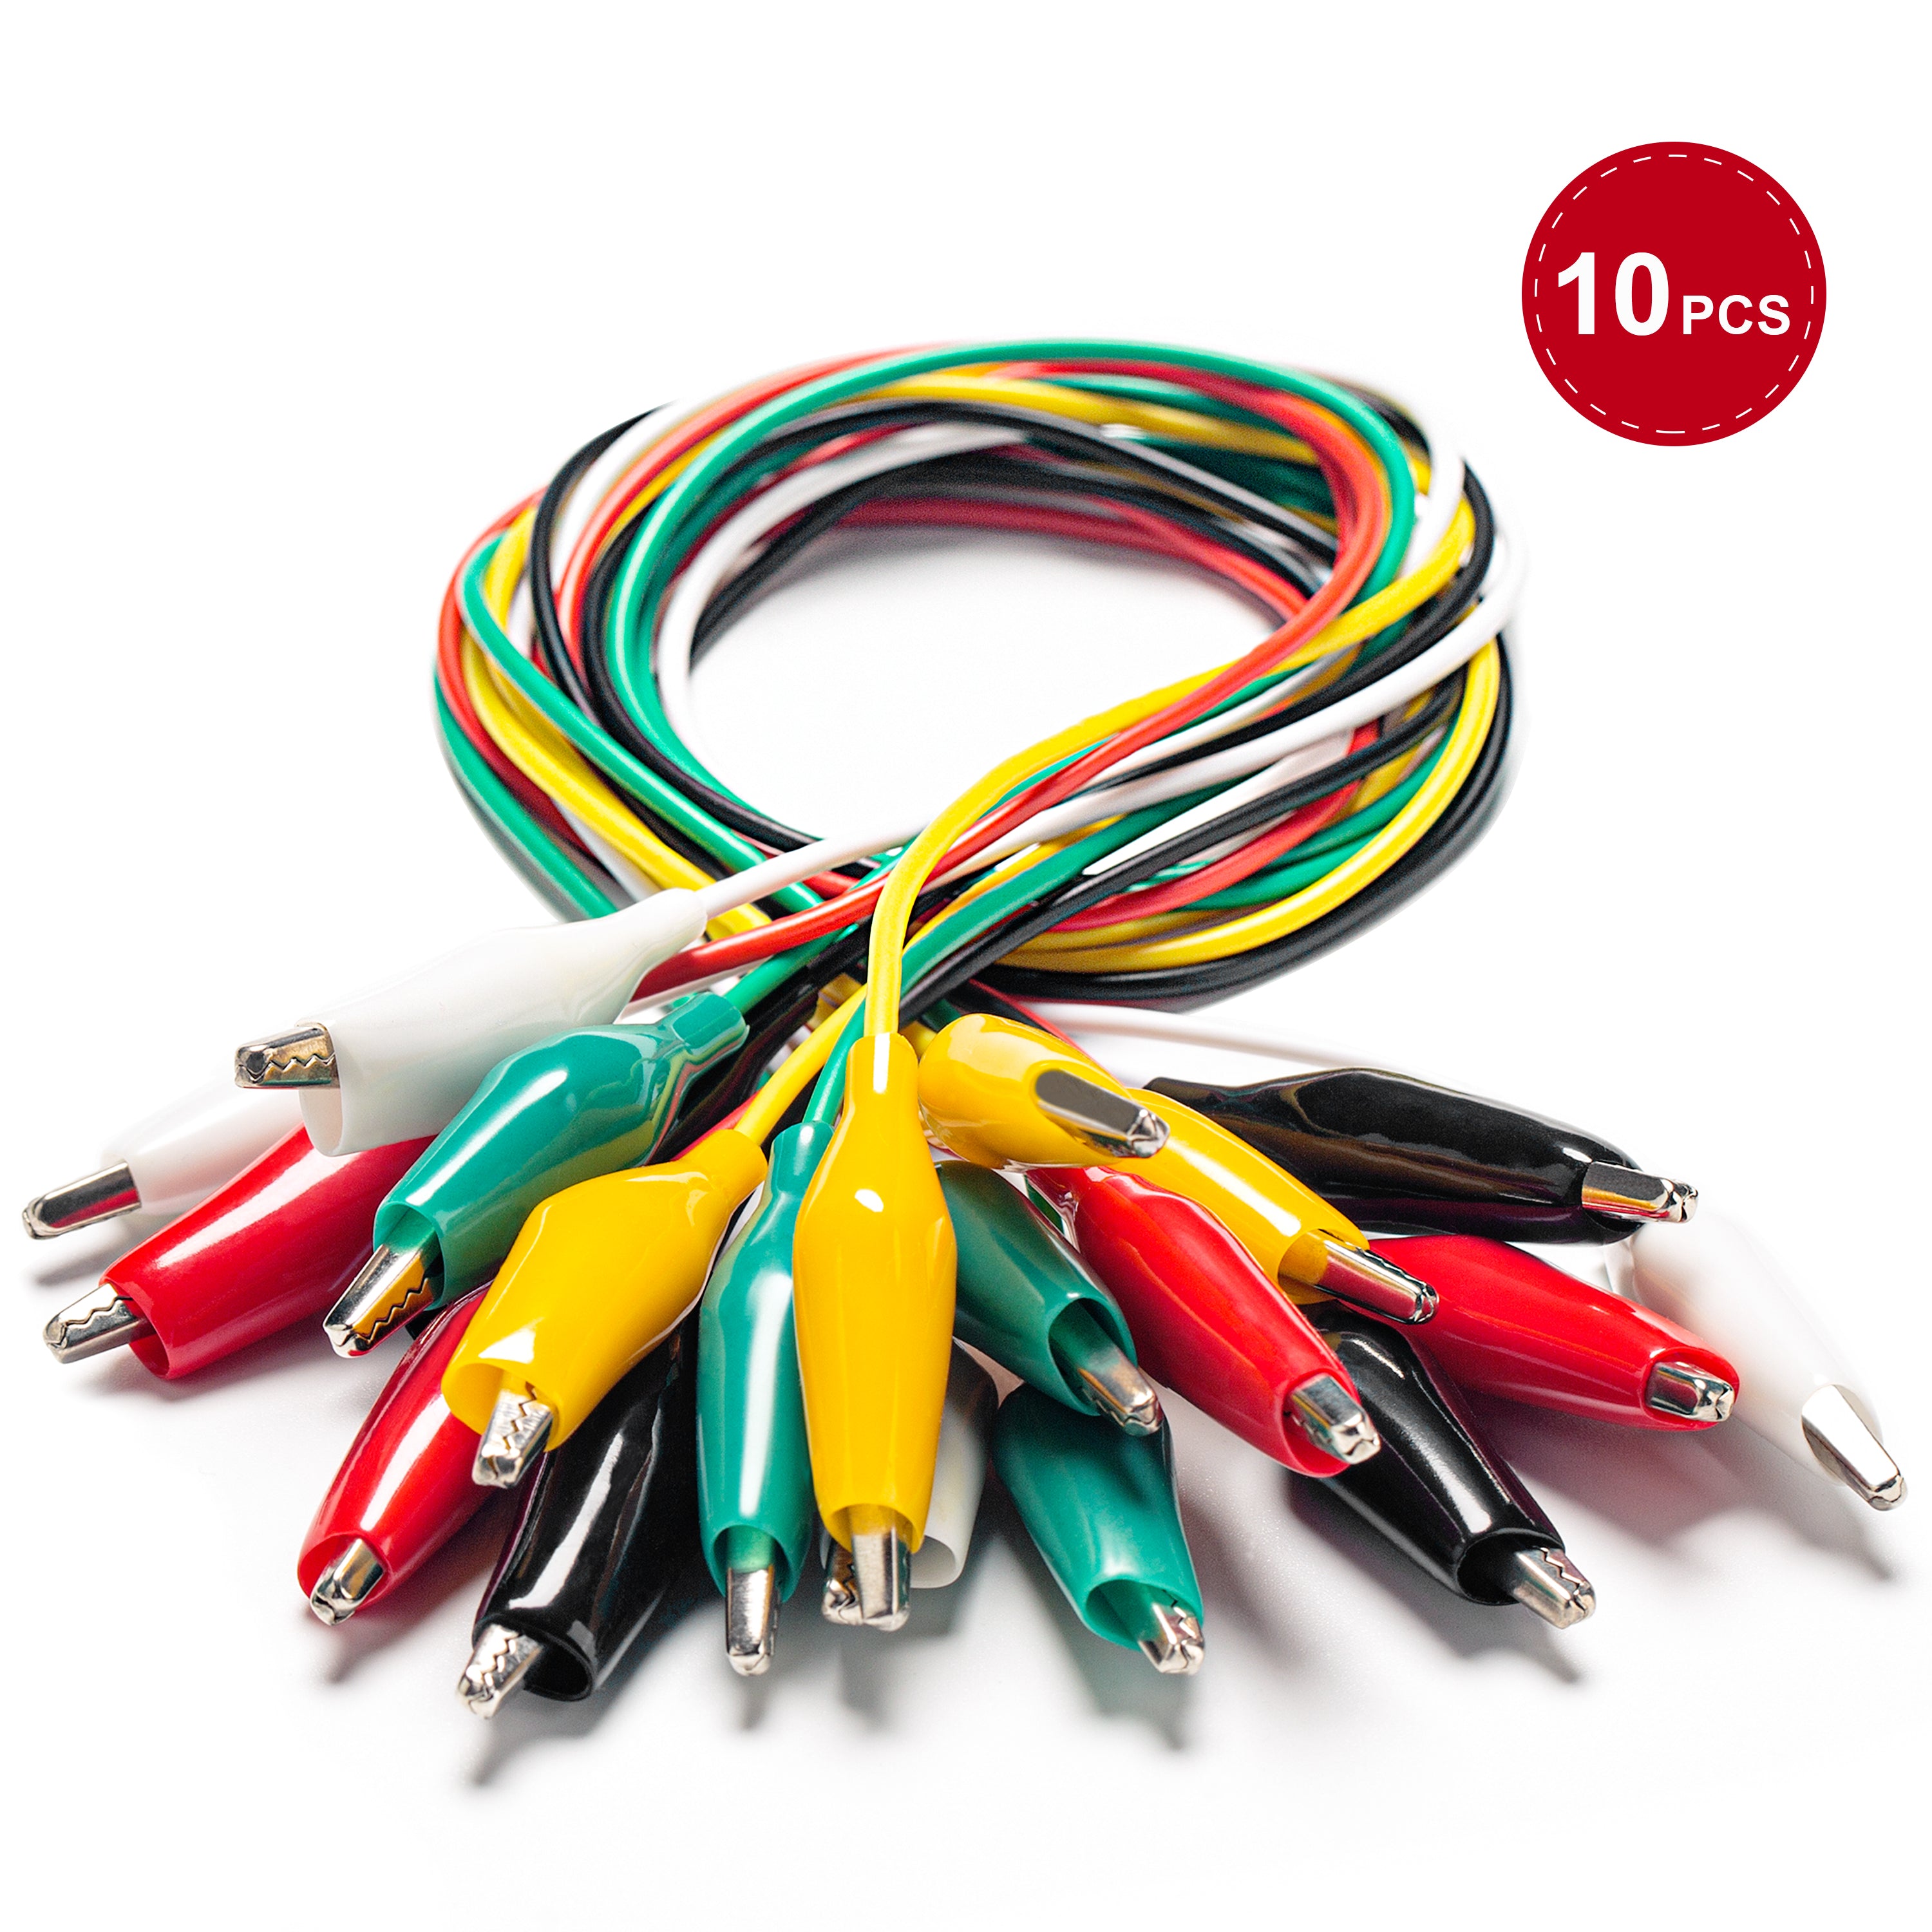 KET02 DIY Electrical Alligator Clips with Wires Test Leads Sets